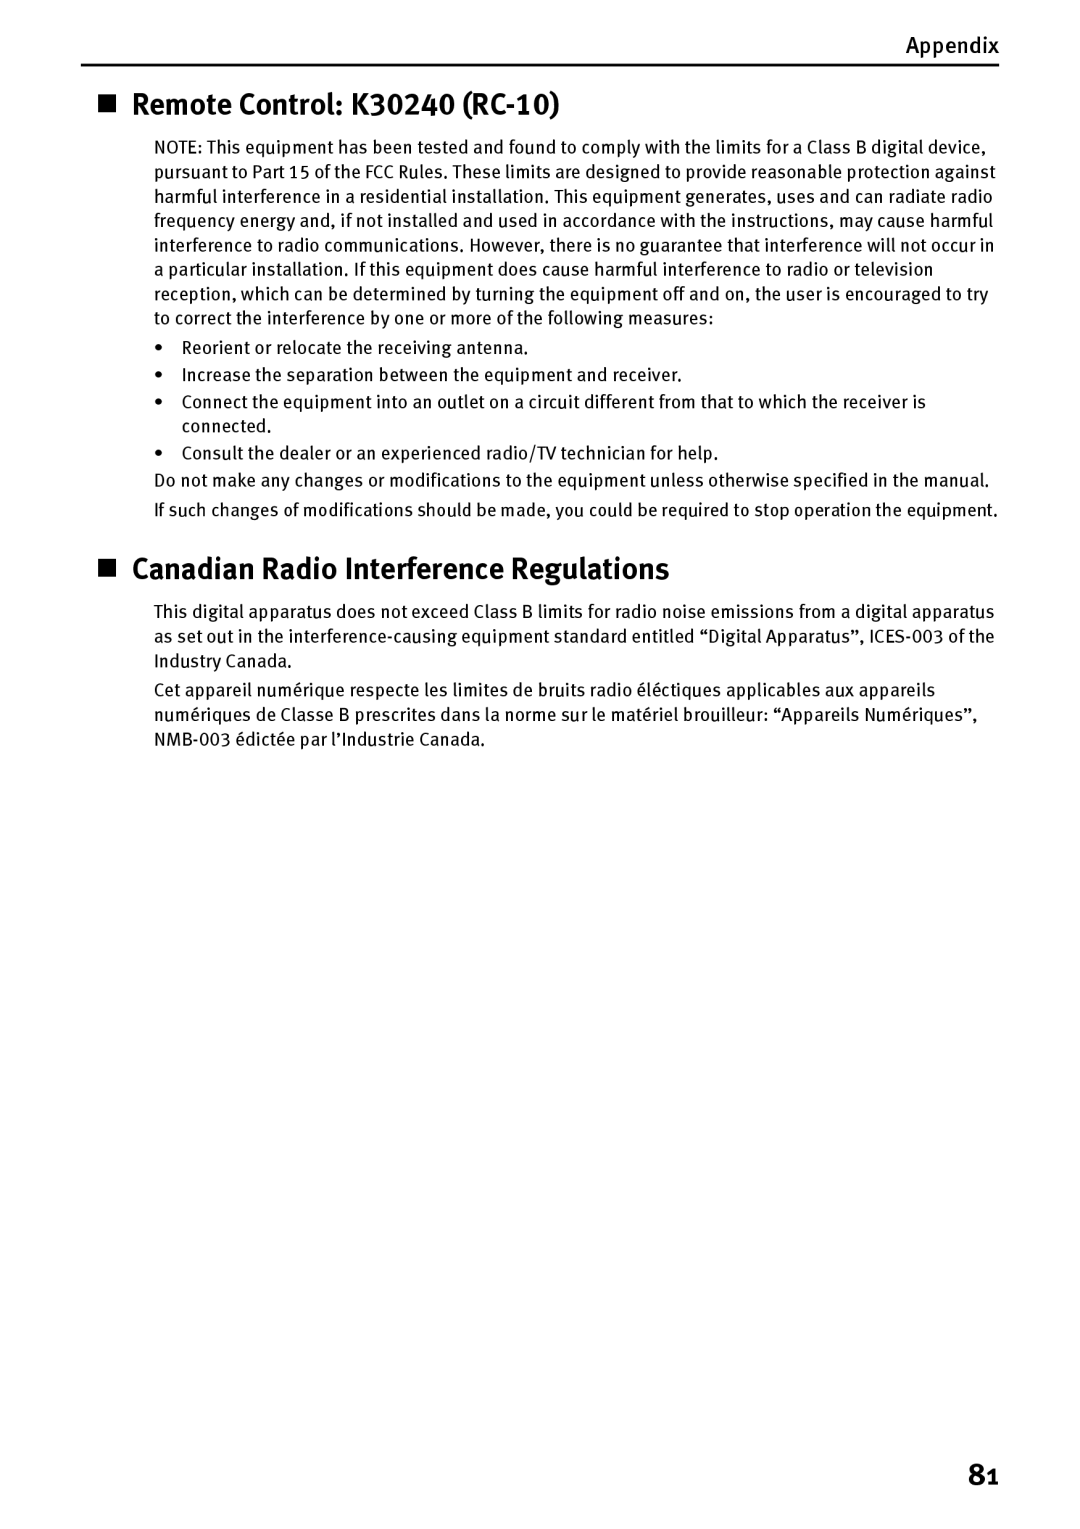 Canon DS700 manual „ Remote Control K30240 RC-10, „ Canadian Radio Interference Regulations 